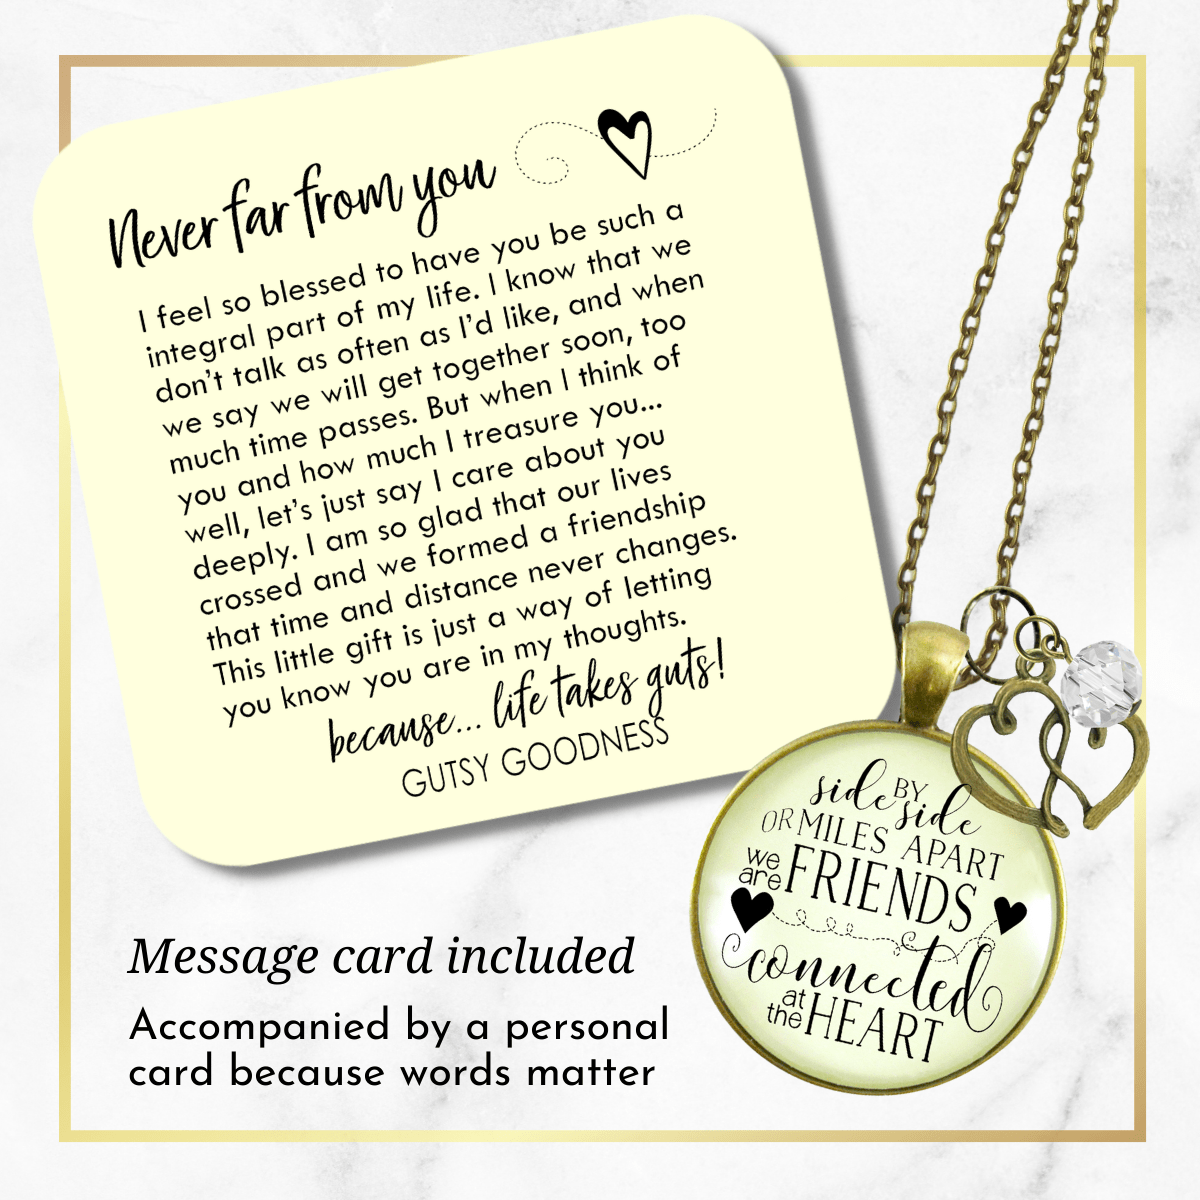 Gutsy Goodness Best Friends Necklace Side by Side Long Distance Quote Gift Jewelry - Gutsy Goodness Handmade Jewelry;Best Friends Necklace Side By Side Long Distance Quote Gift Jewelry - Gutsy Goodness Handmade Jewelry Gifts